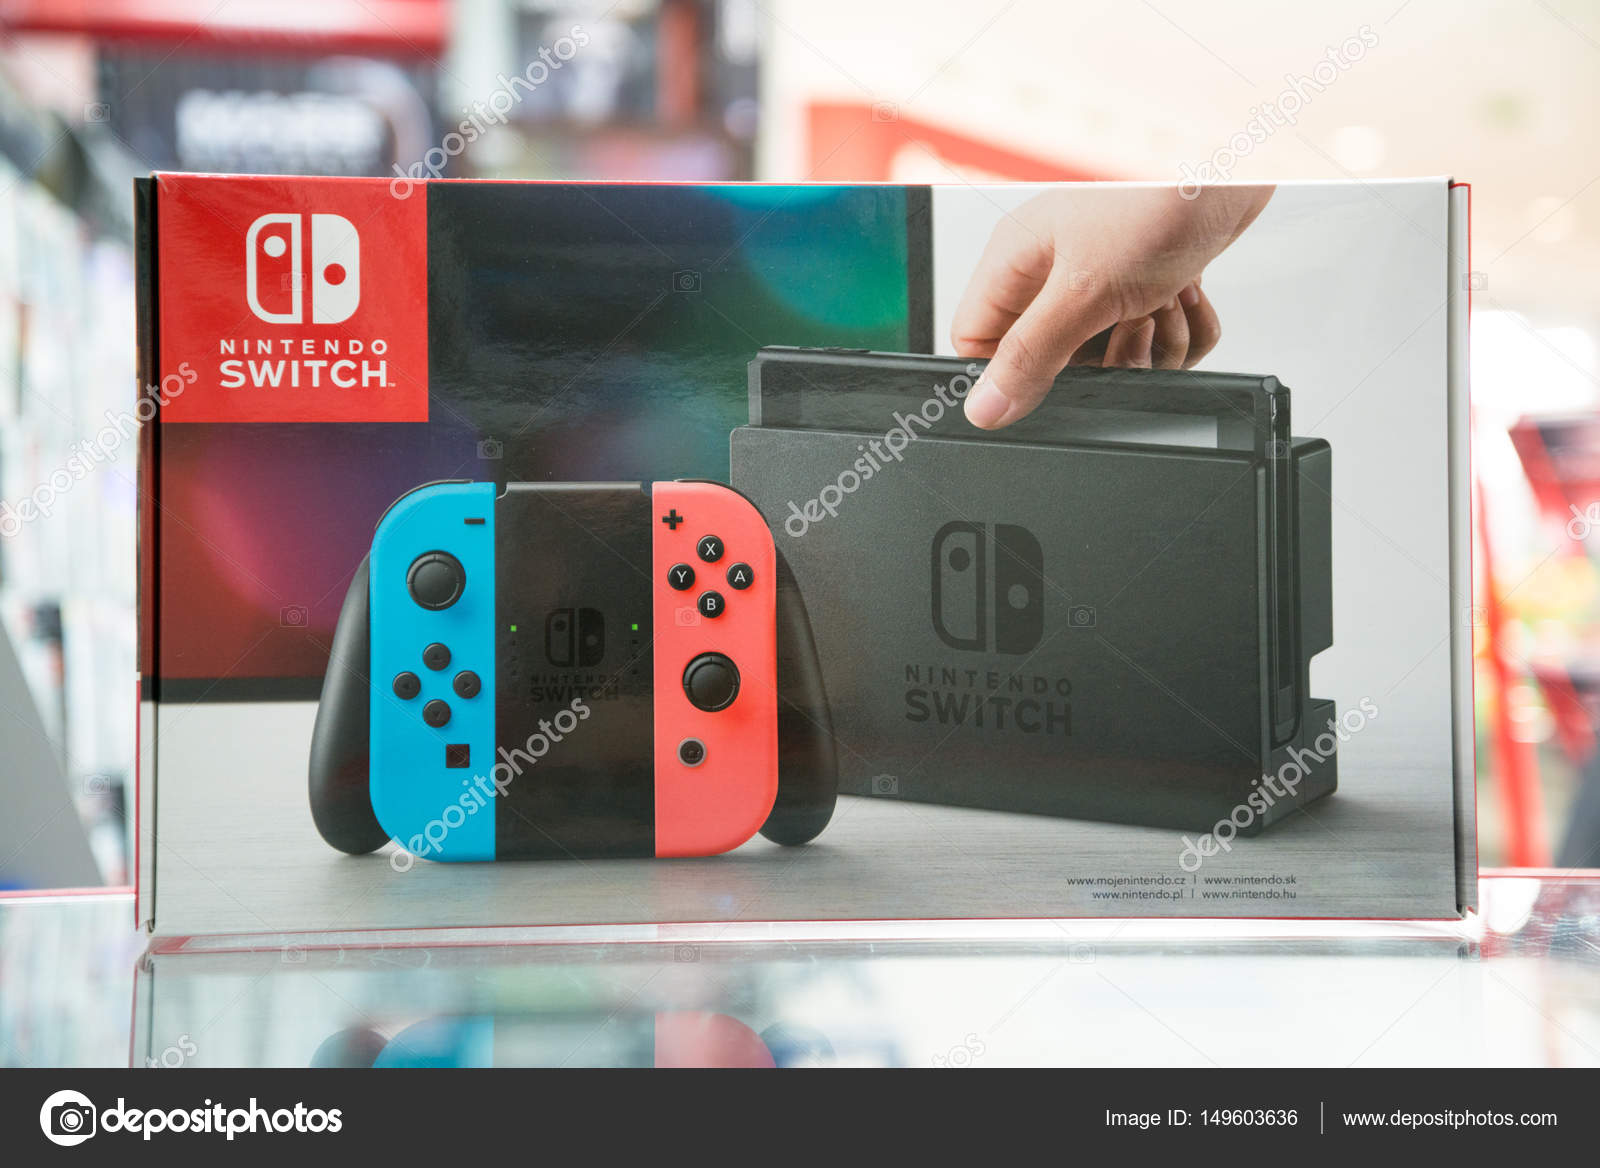 Bore maksimum Afstå Nintendo Switch video game console – Stock Editorial Photo © Pe3check  #149603636